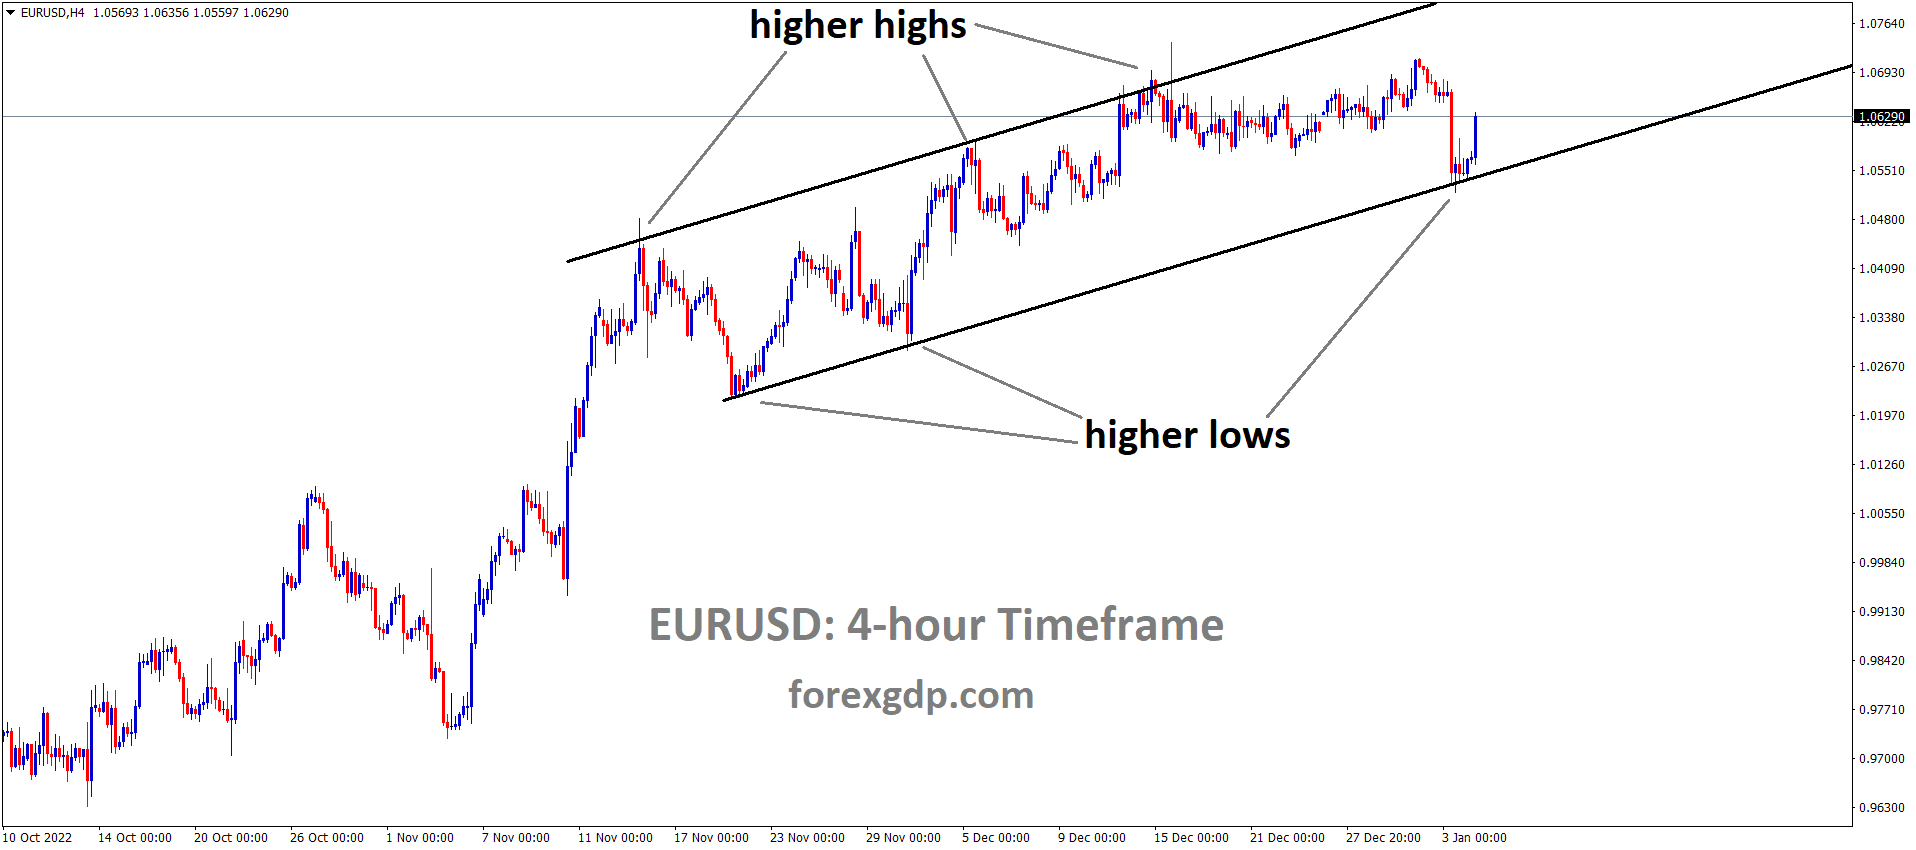 EURUSD is moving in an Ascending channel and the market has rebounded from the higher low area of the channel